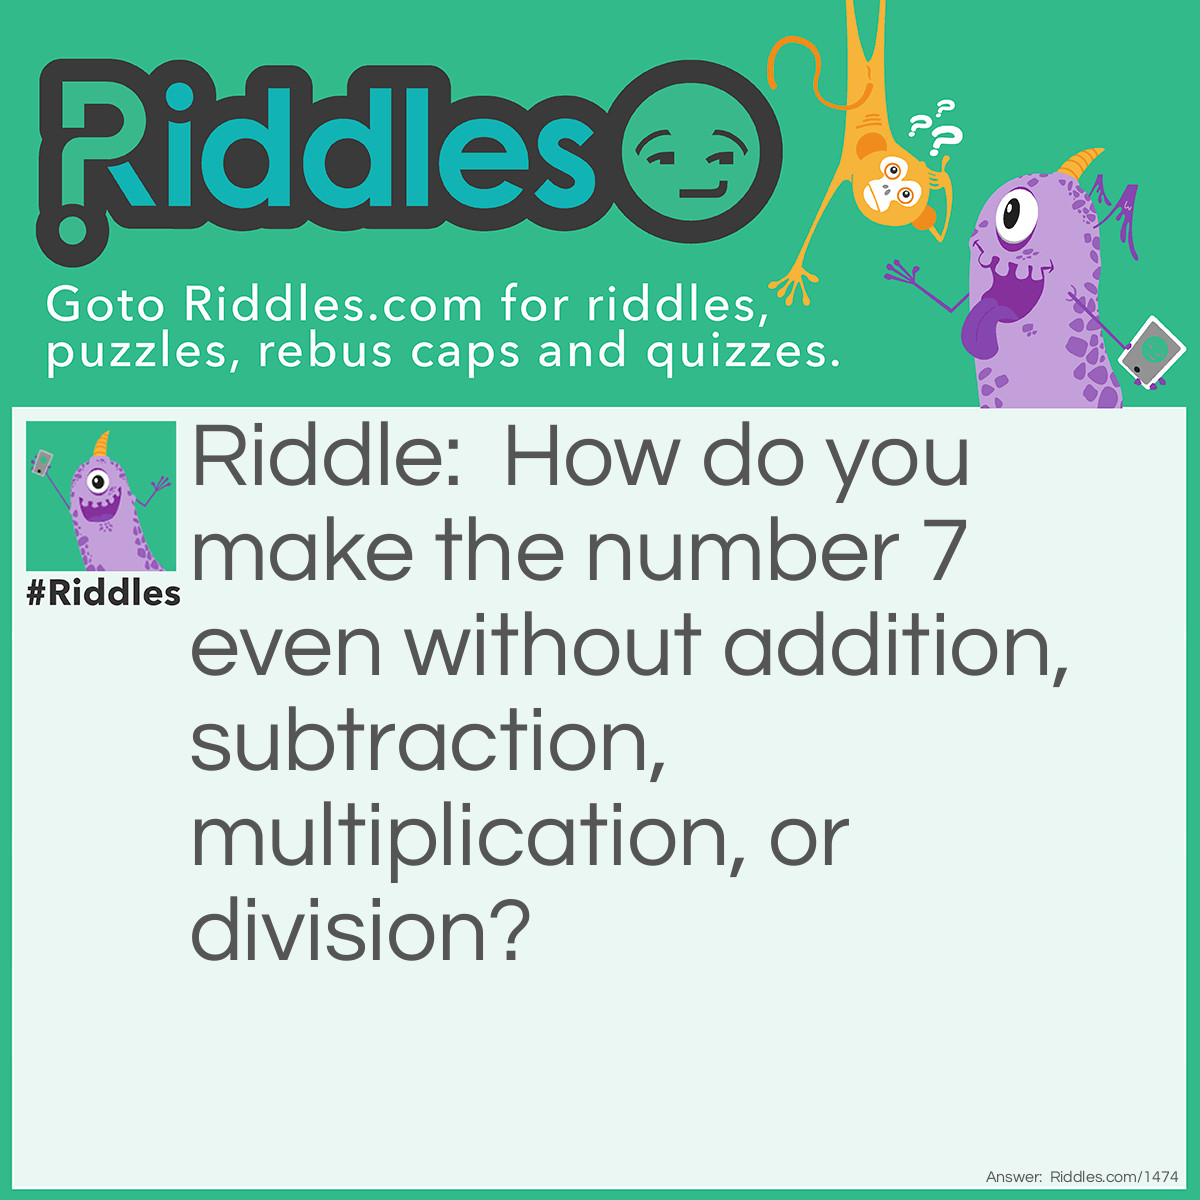 Riddle: How do you make the number 7 even without addition, subtraction, multiplication, or division? Answer: Drop the "S".